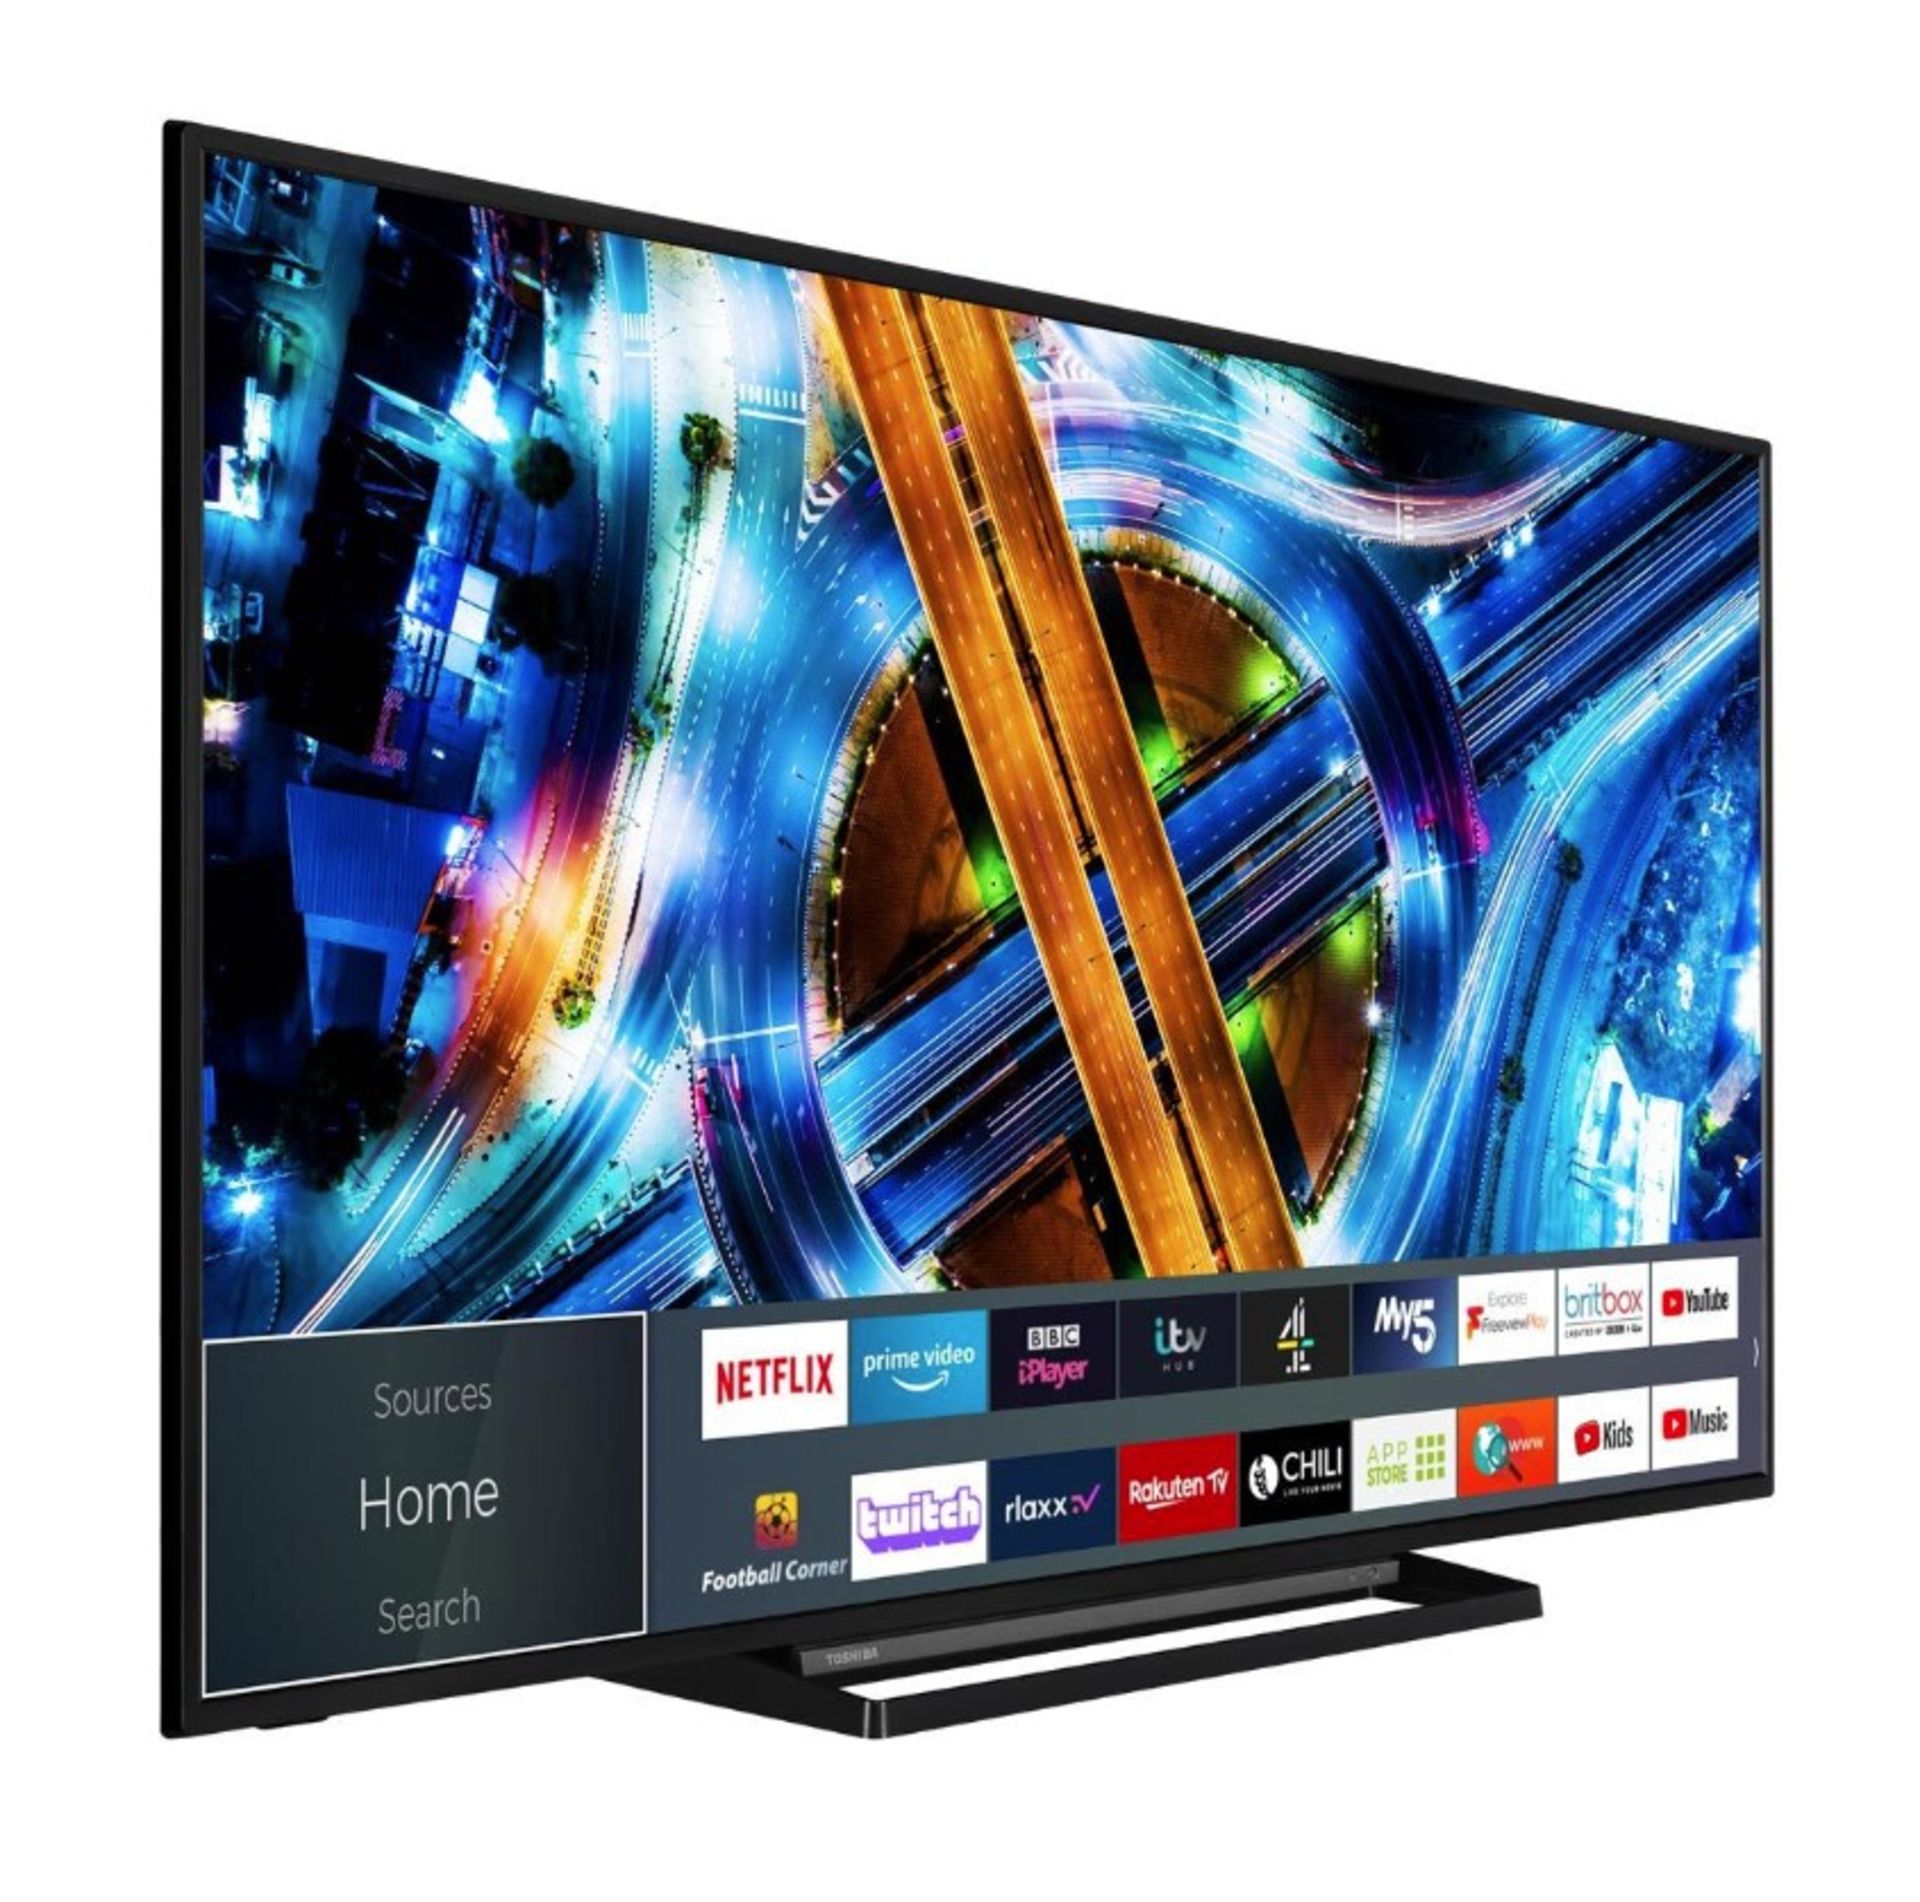 1 BOXED TOSHIBA 55UL2063DB 55-INCH SMART 4K ULTRA-HD LED TV WITH STAND AND REMOTE Â£349 (WORKING)